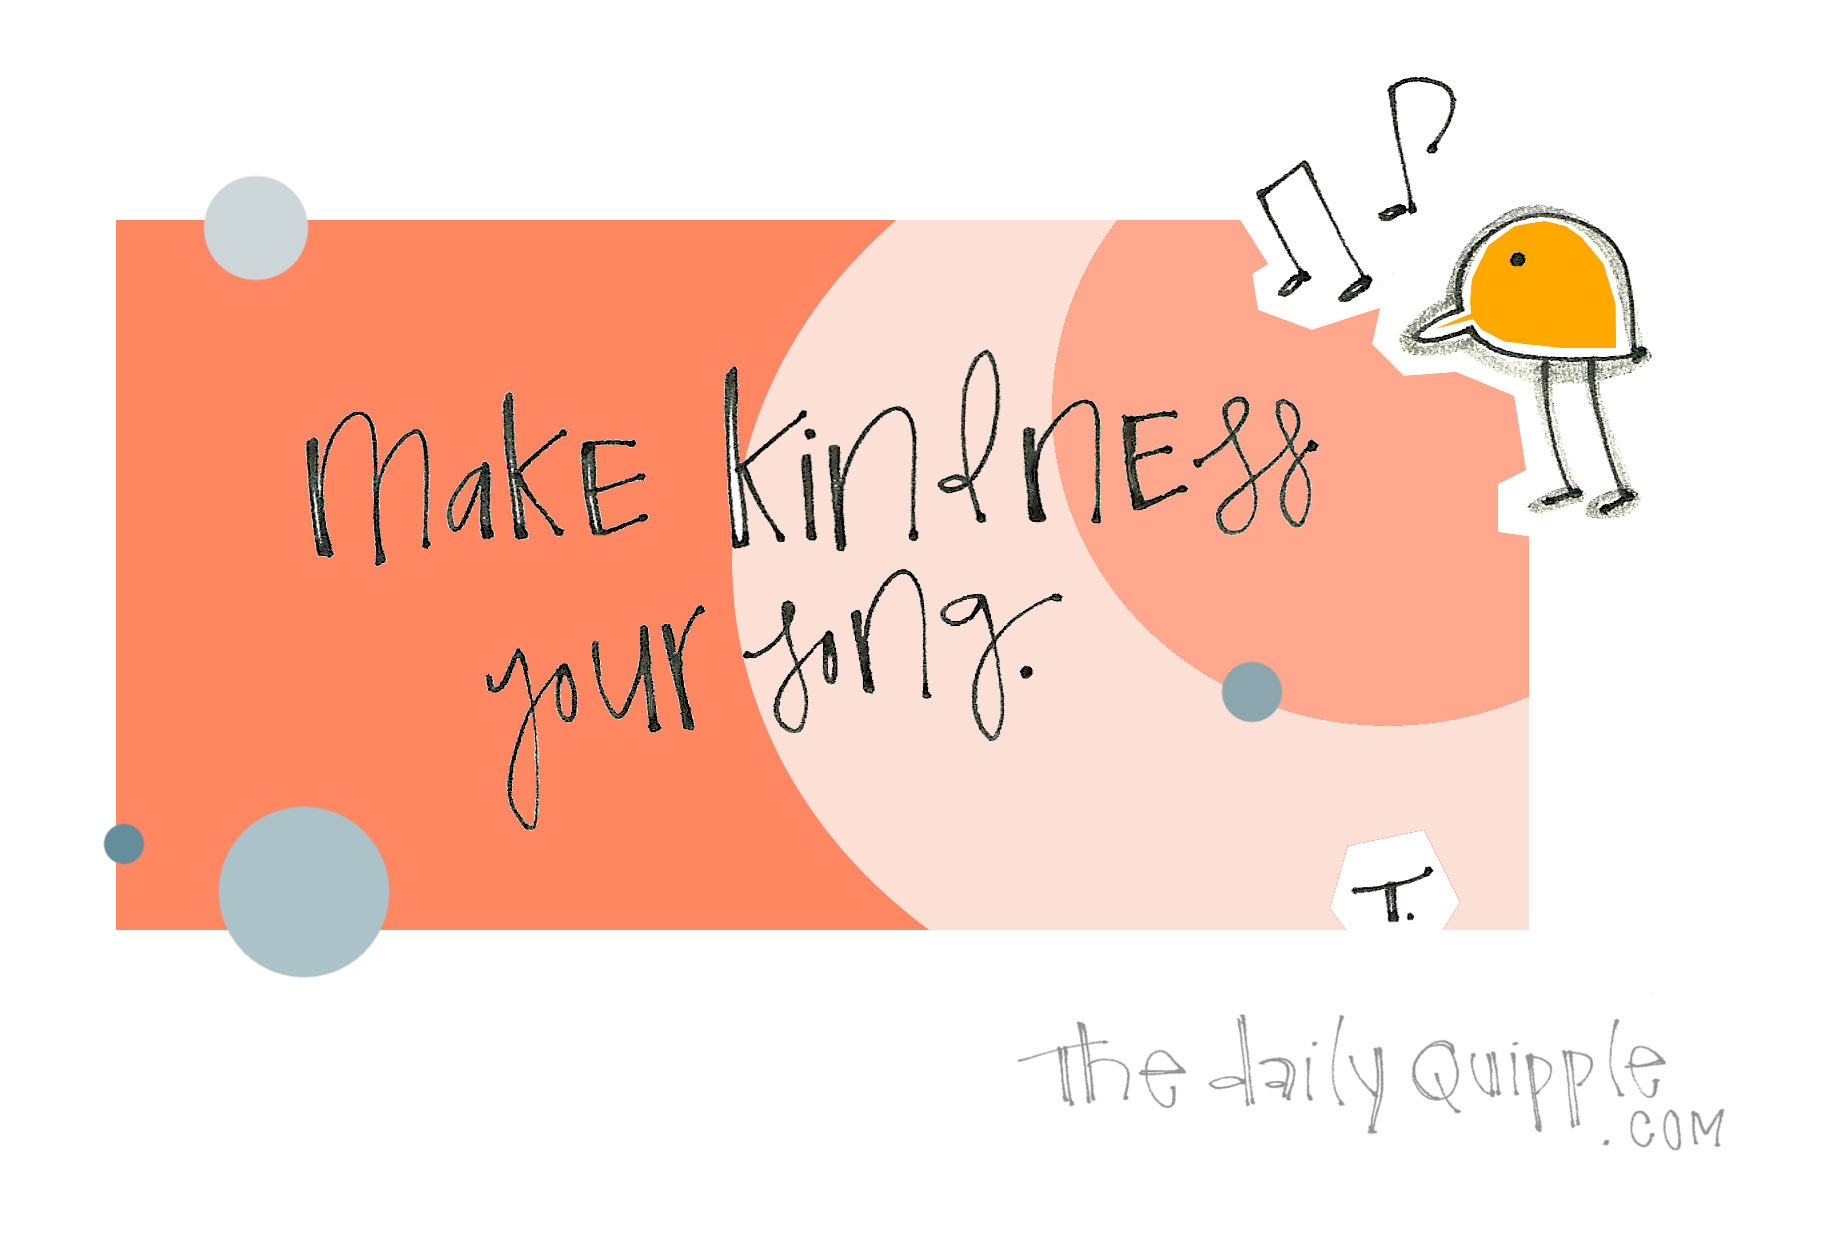 Make kindness your song.